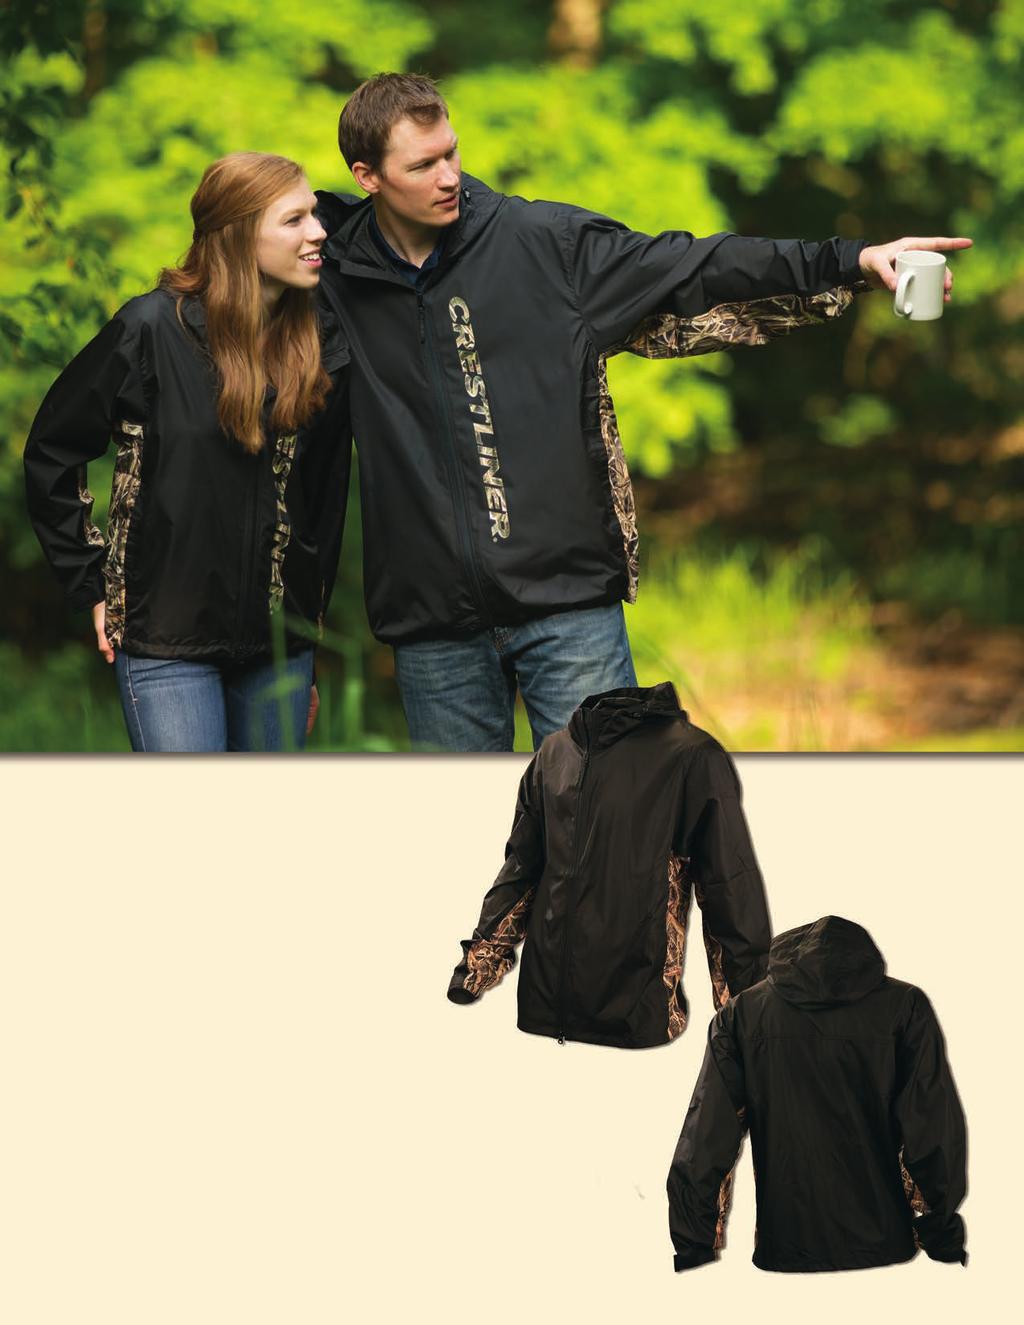 ADVENTURE JACKET Windproof, Water-Resistant Shell Jacket Ideal for those cool